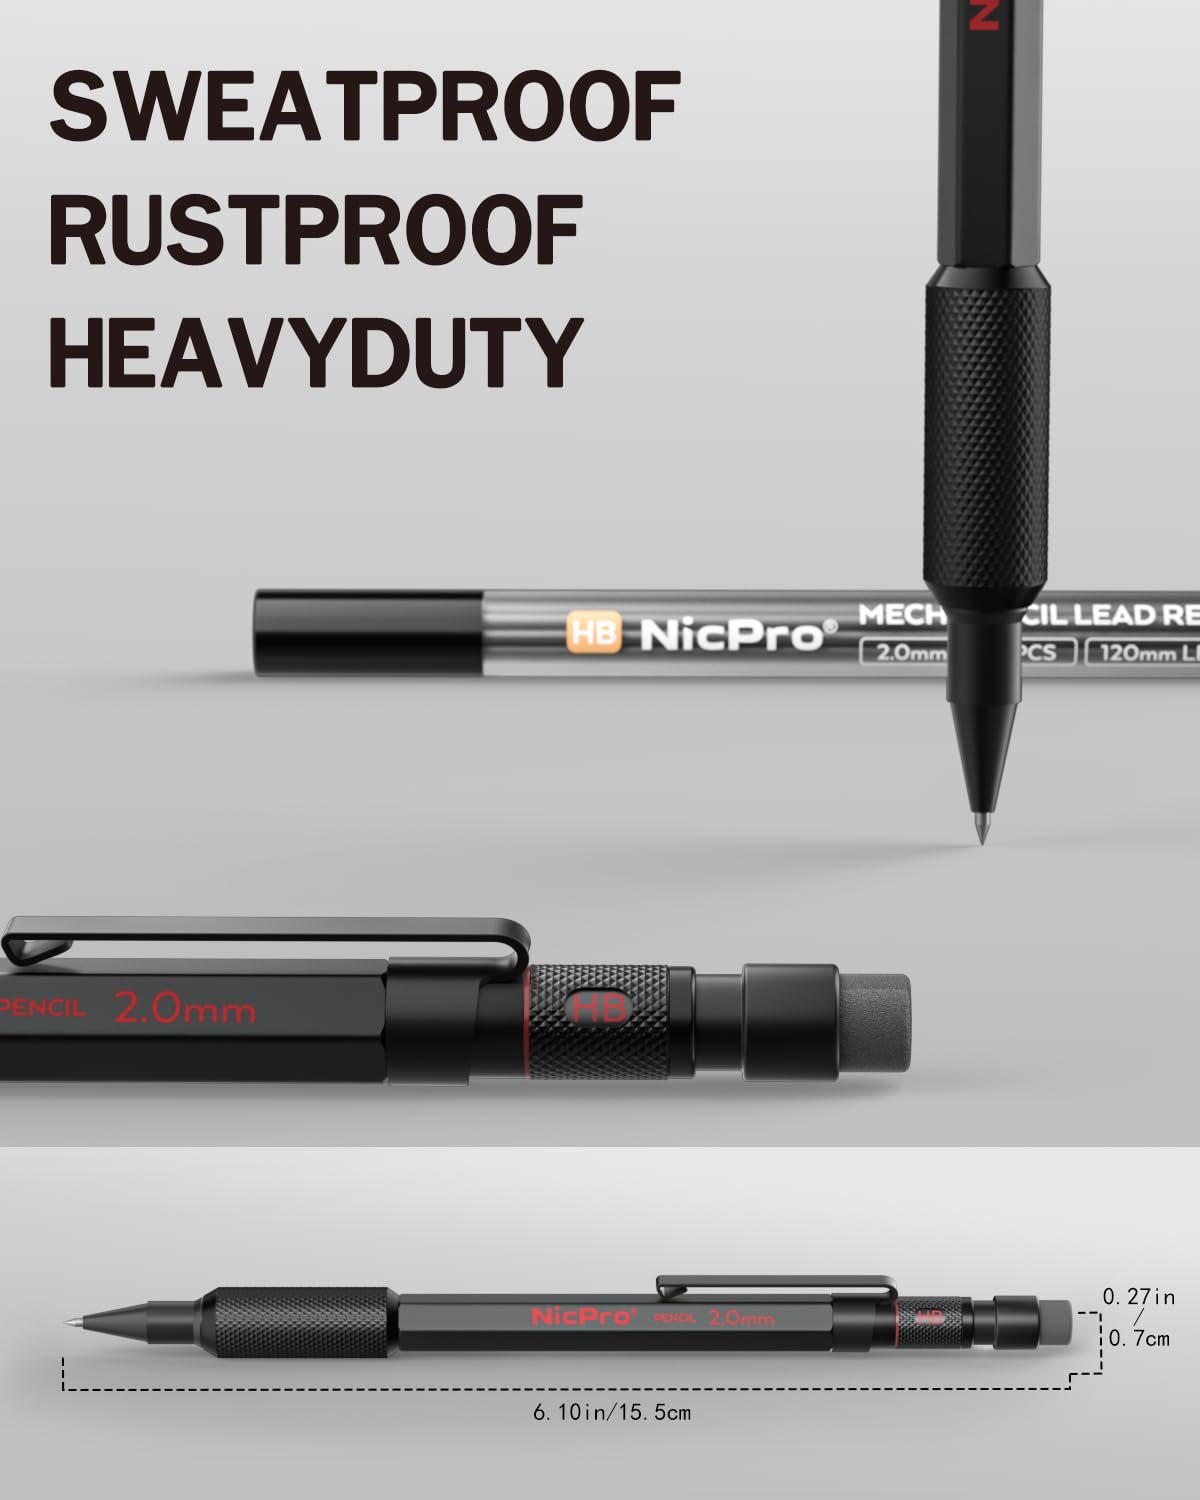 Nicpro 2.0mm Metal Mechanical Pencils, Carpenter Pencil Set with 12 Black Lead Refills, 12 Colored Lead Refills, Erasers, Come with Case